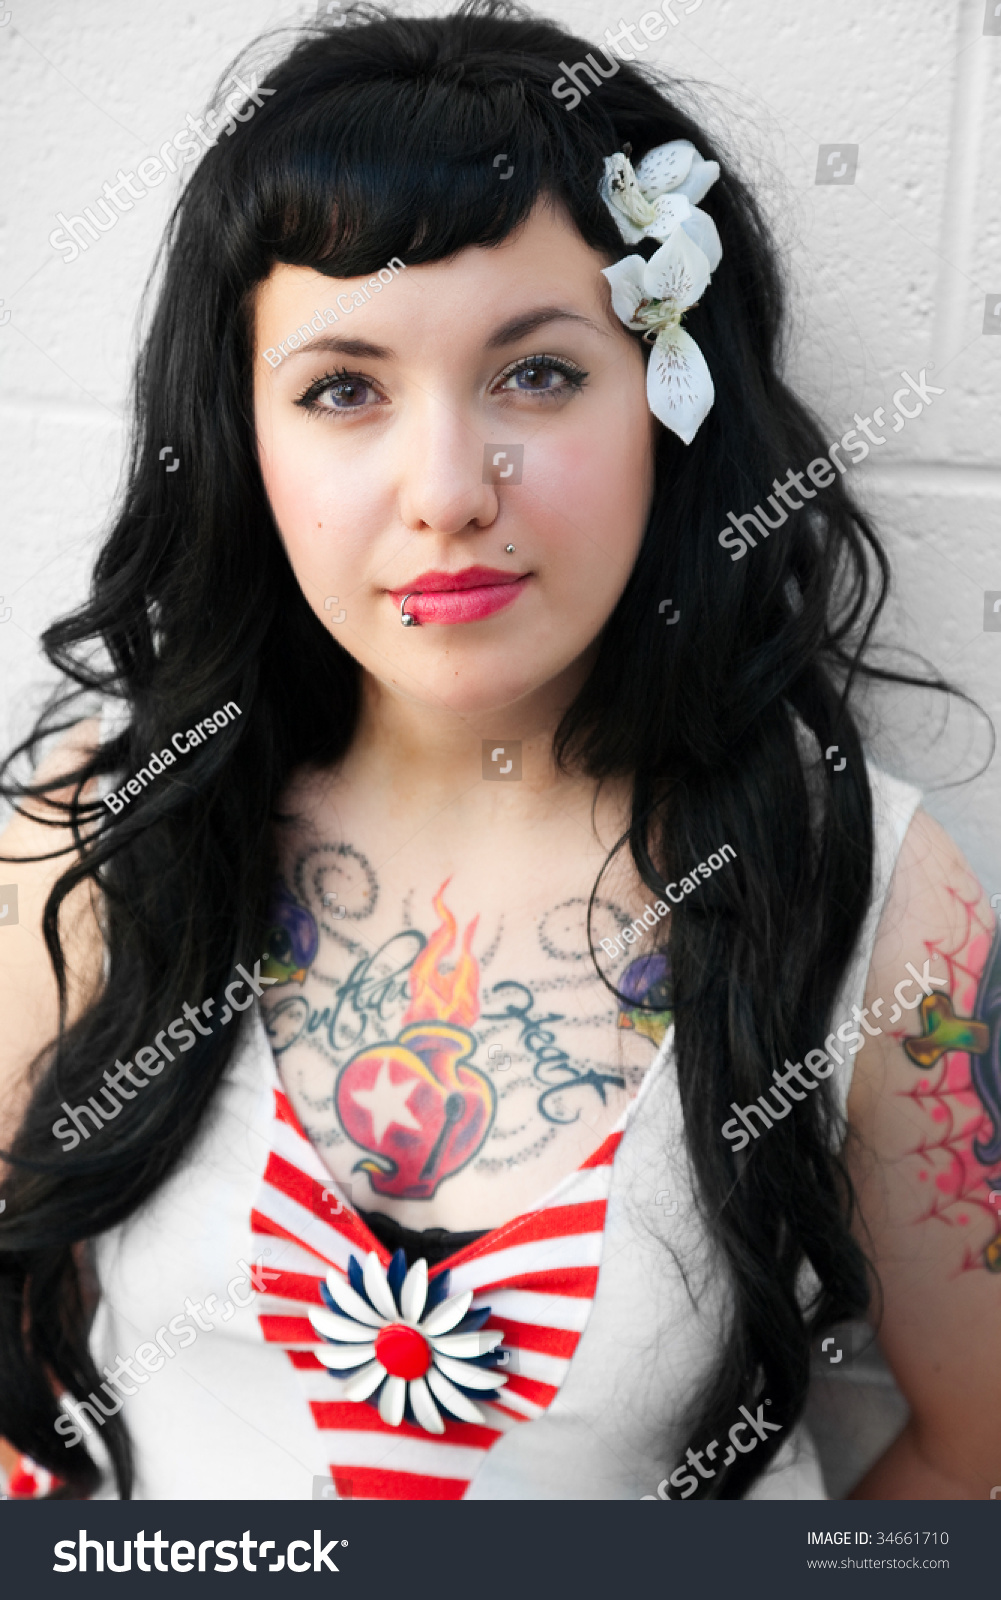 Portrait Of A Young Girl Dressed In Rockabilly Fashion. Stock Photo ...